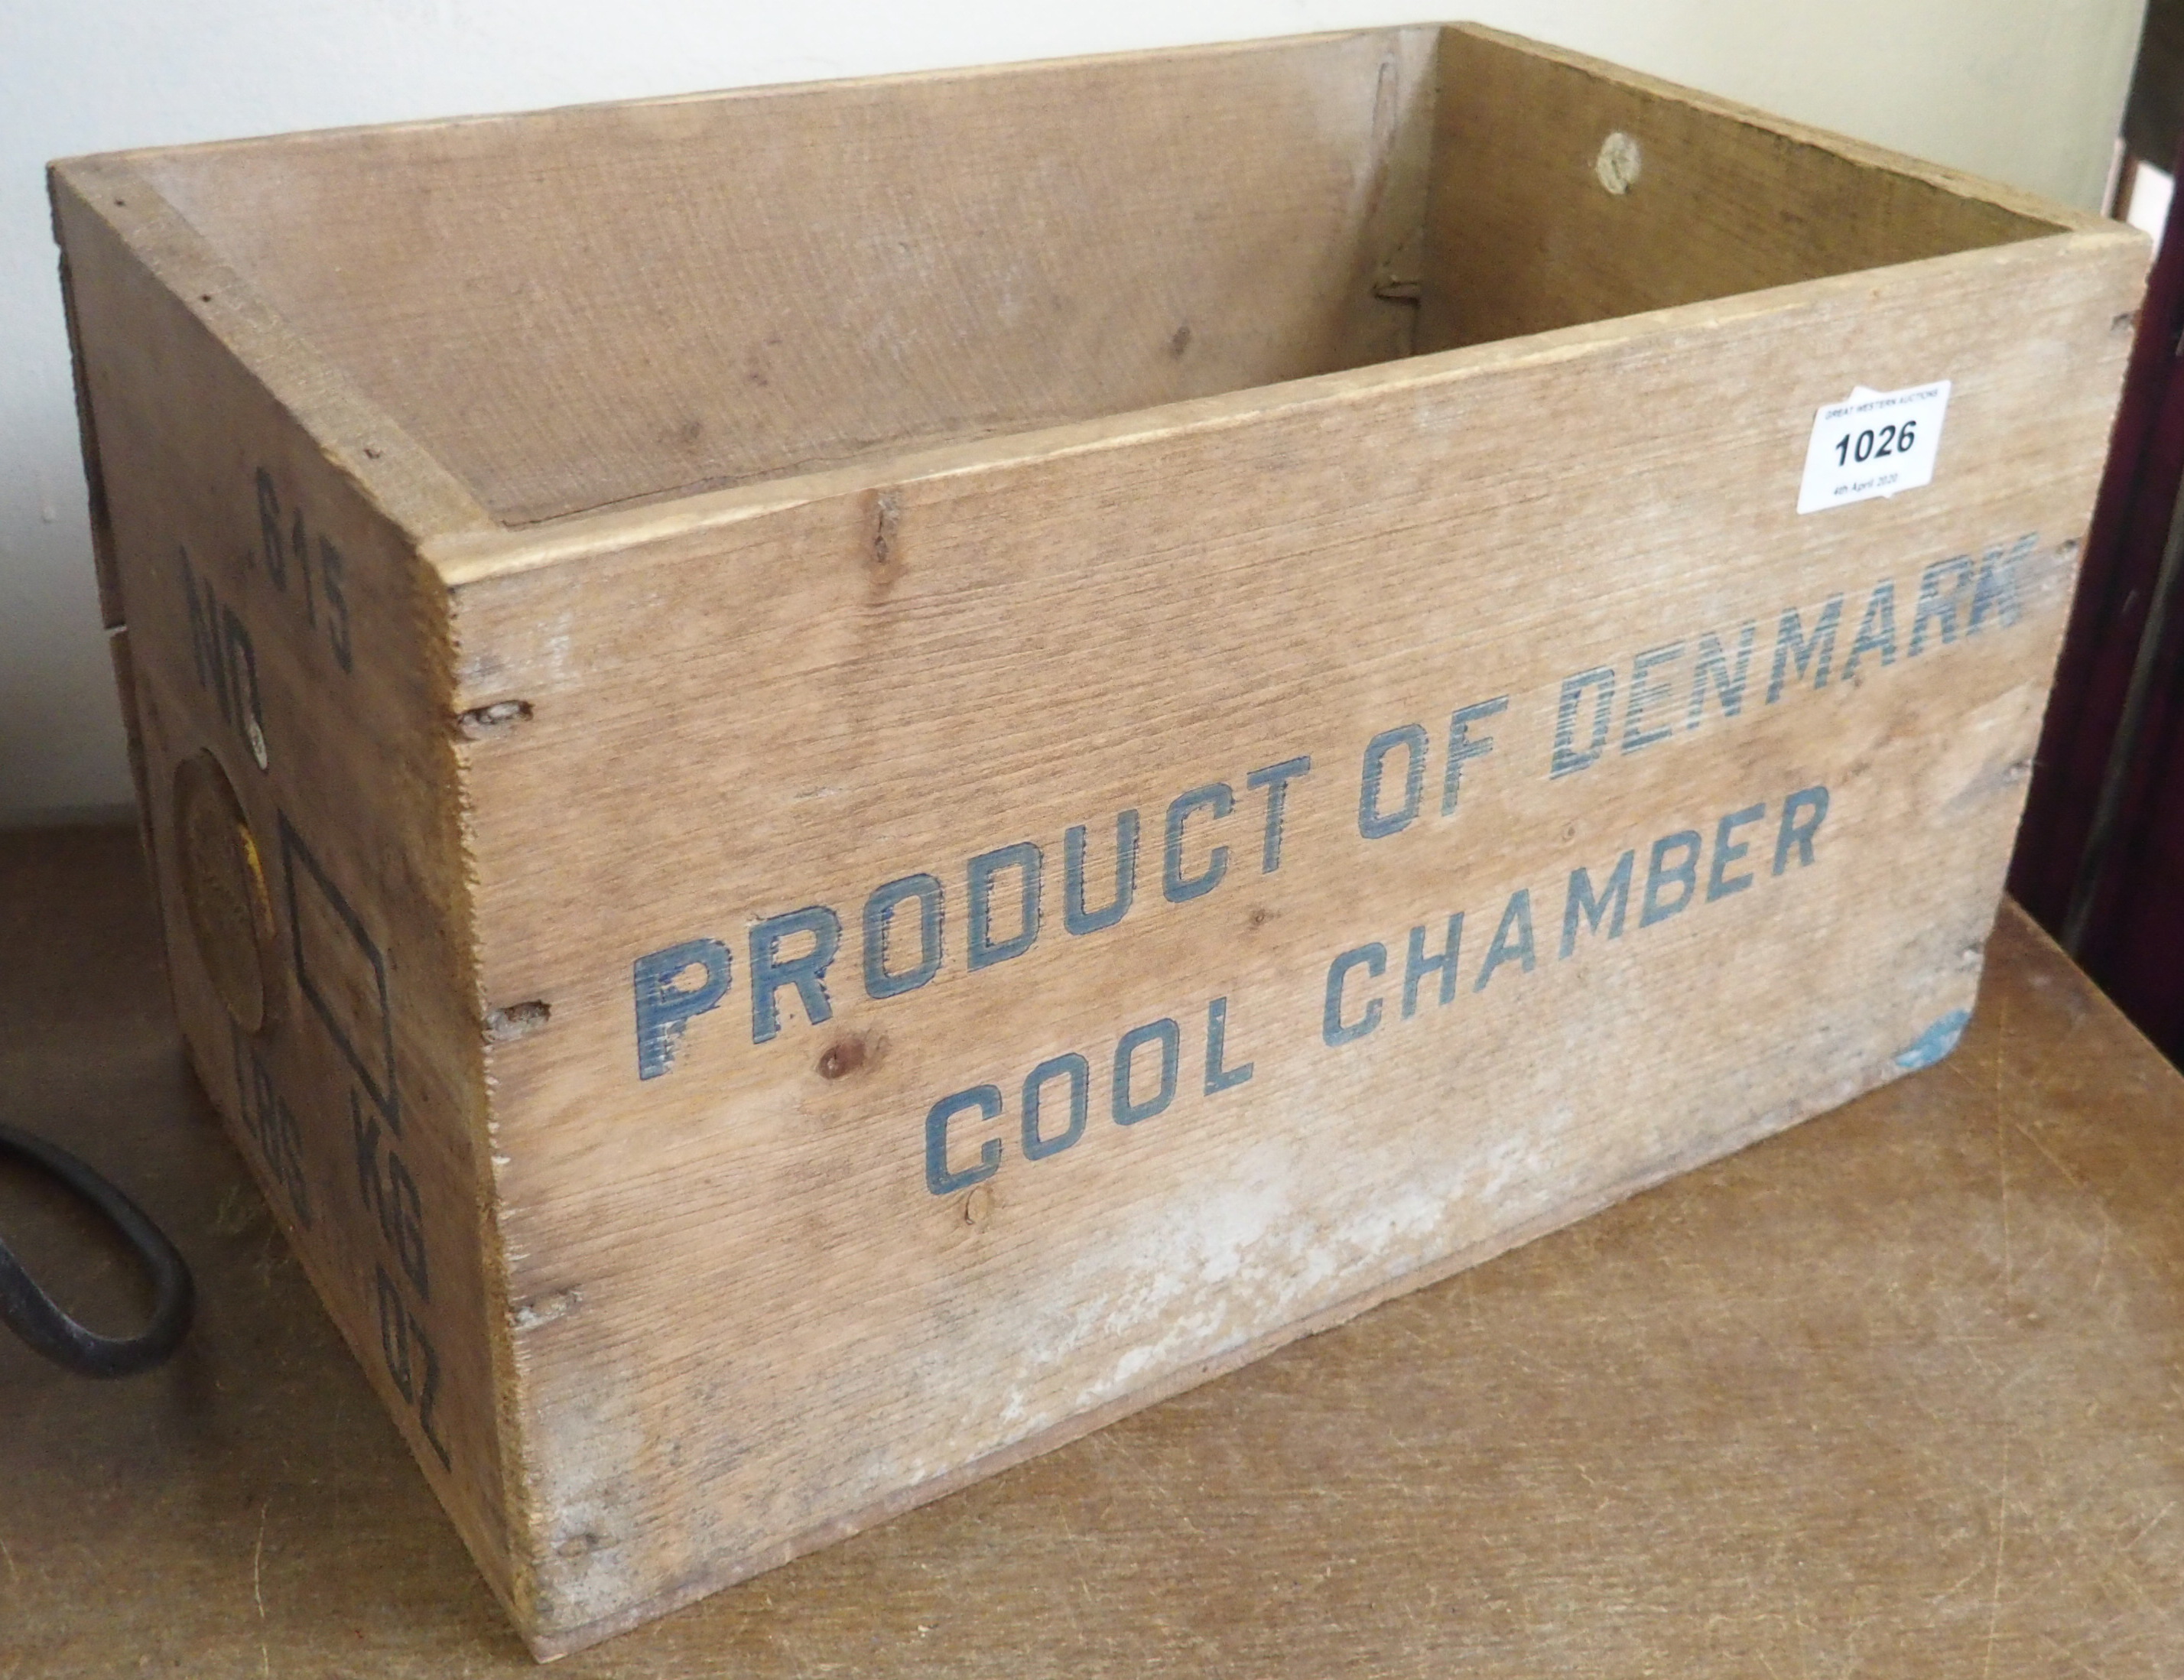 A Product of Denmark cool chamber box, Singer sewing machine. (Assorted paintings withdrawn)